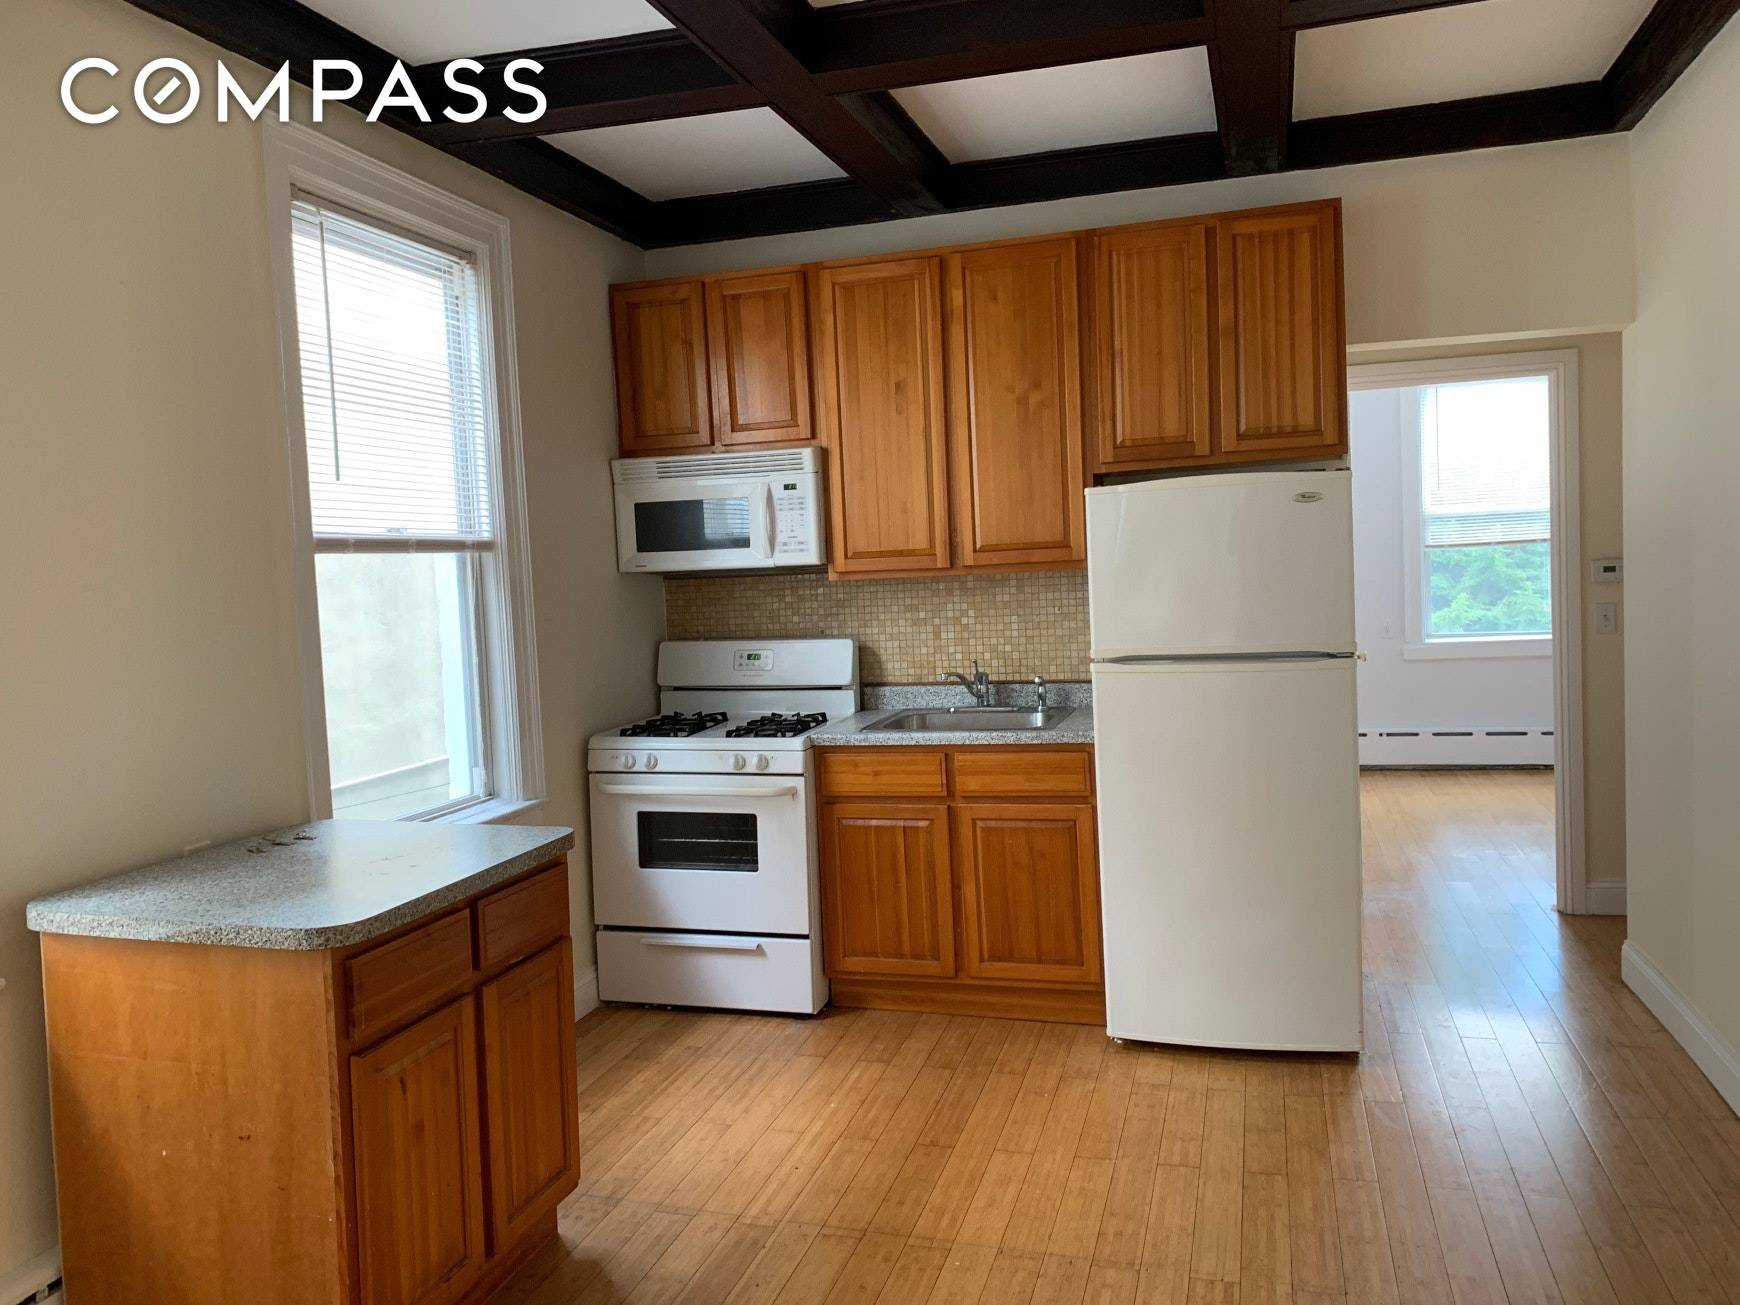 Recently renovated 3 bedroom 2 bathroom apartment in the heart of Astoria.